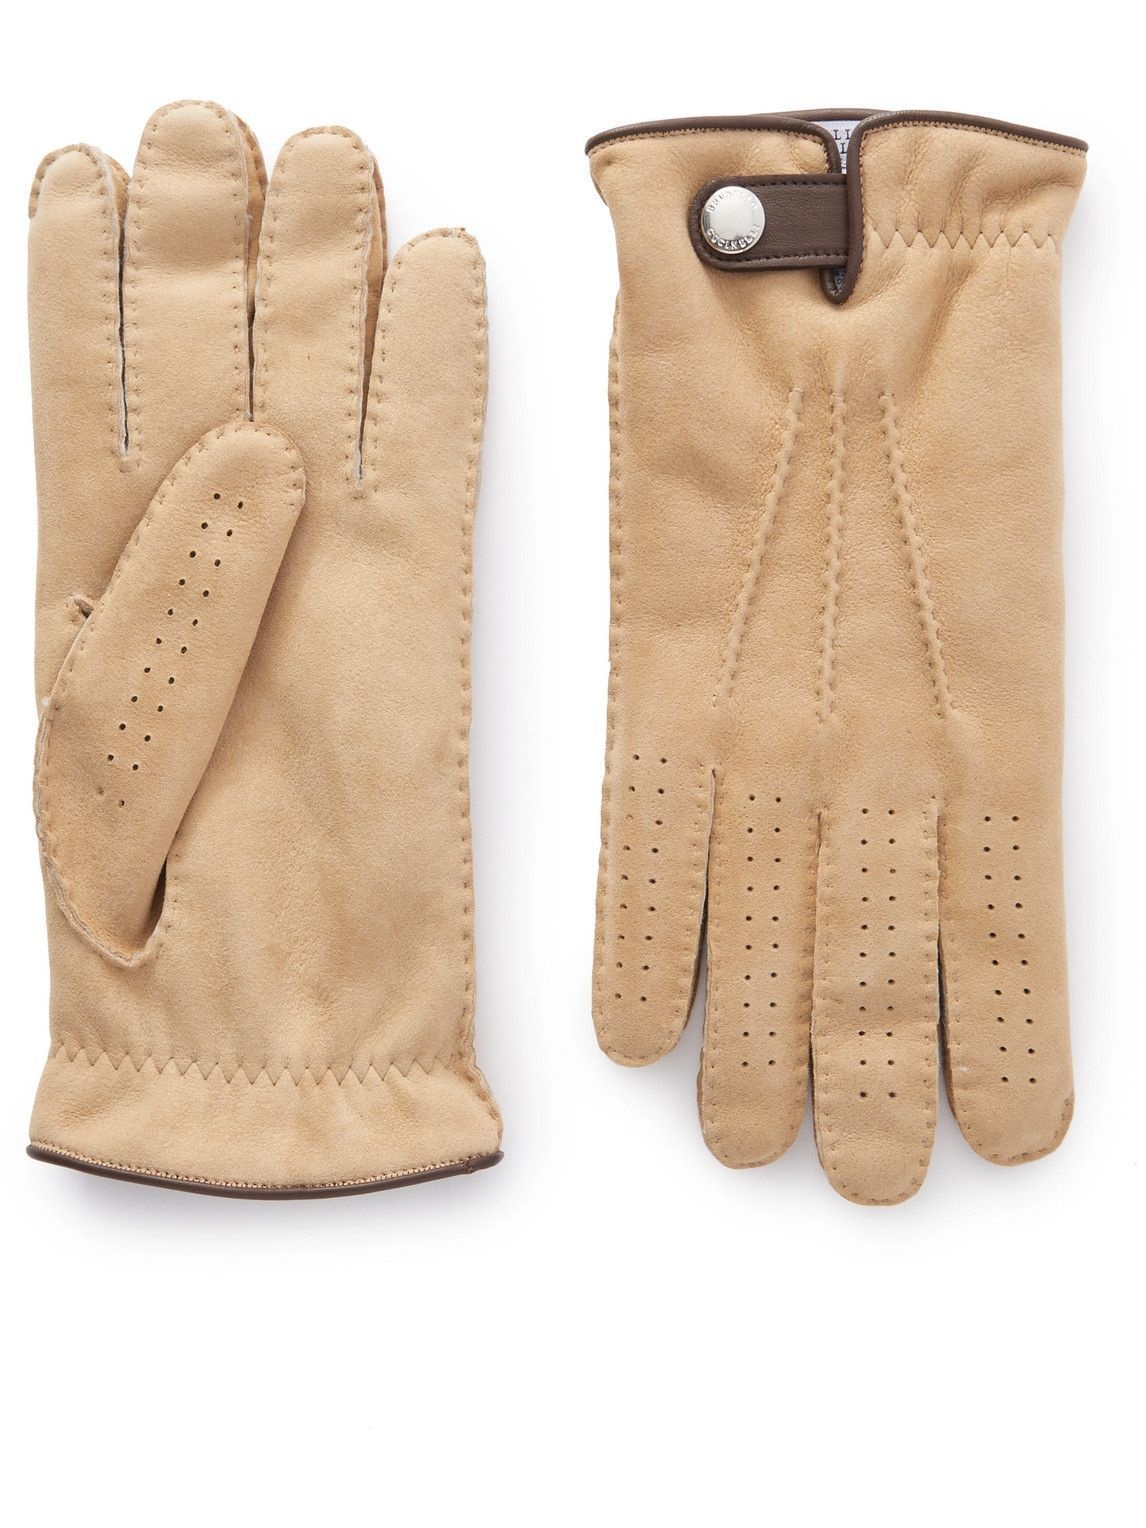 Photo: Brunello Cucinelli - Leather-Trimmed Shearling Gloves - Brown